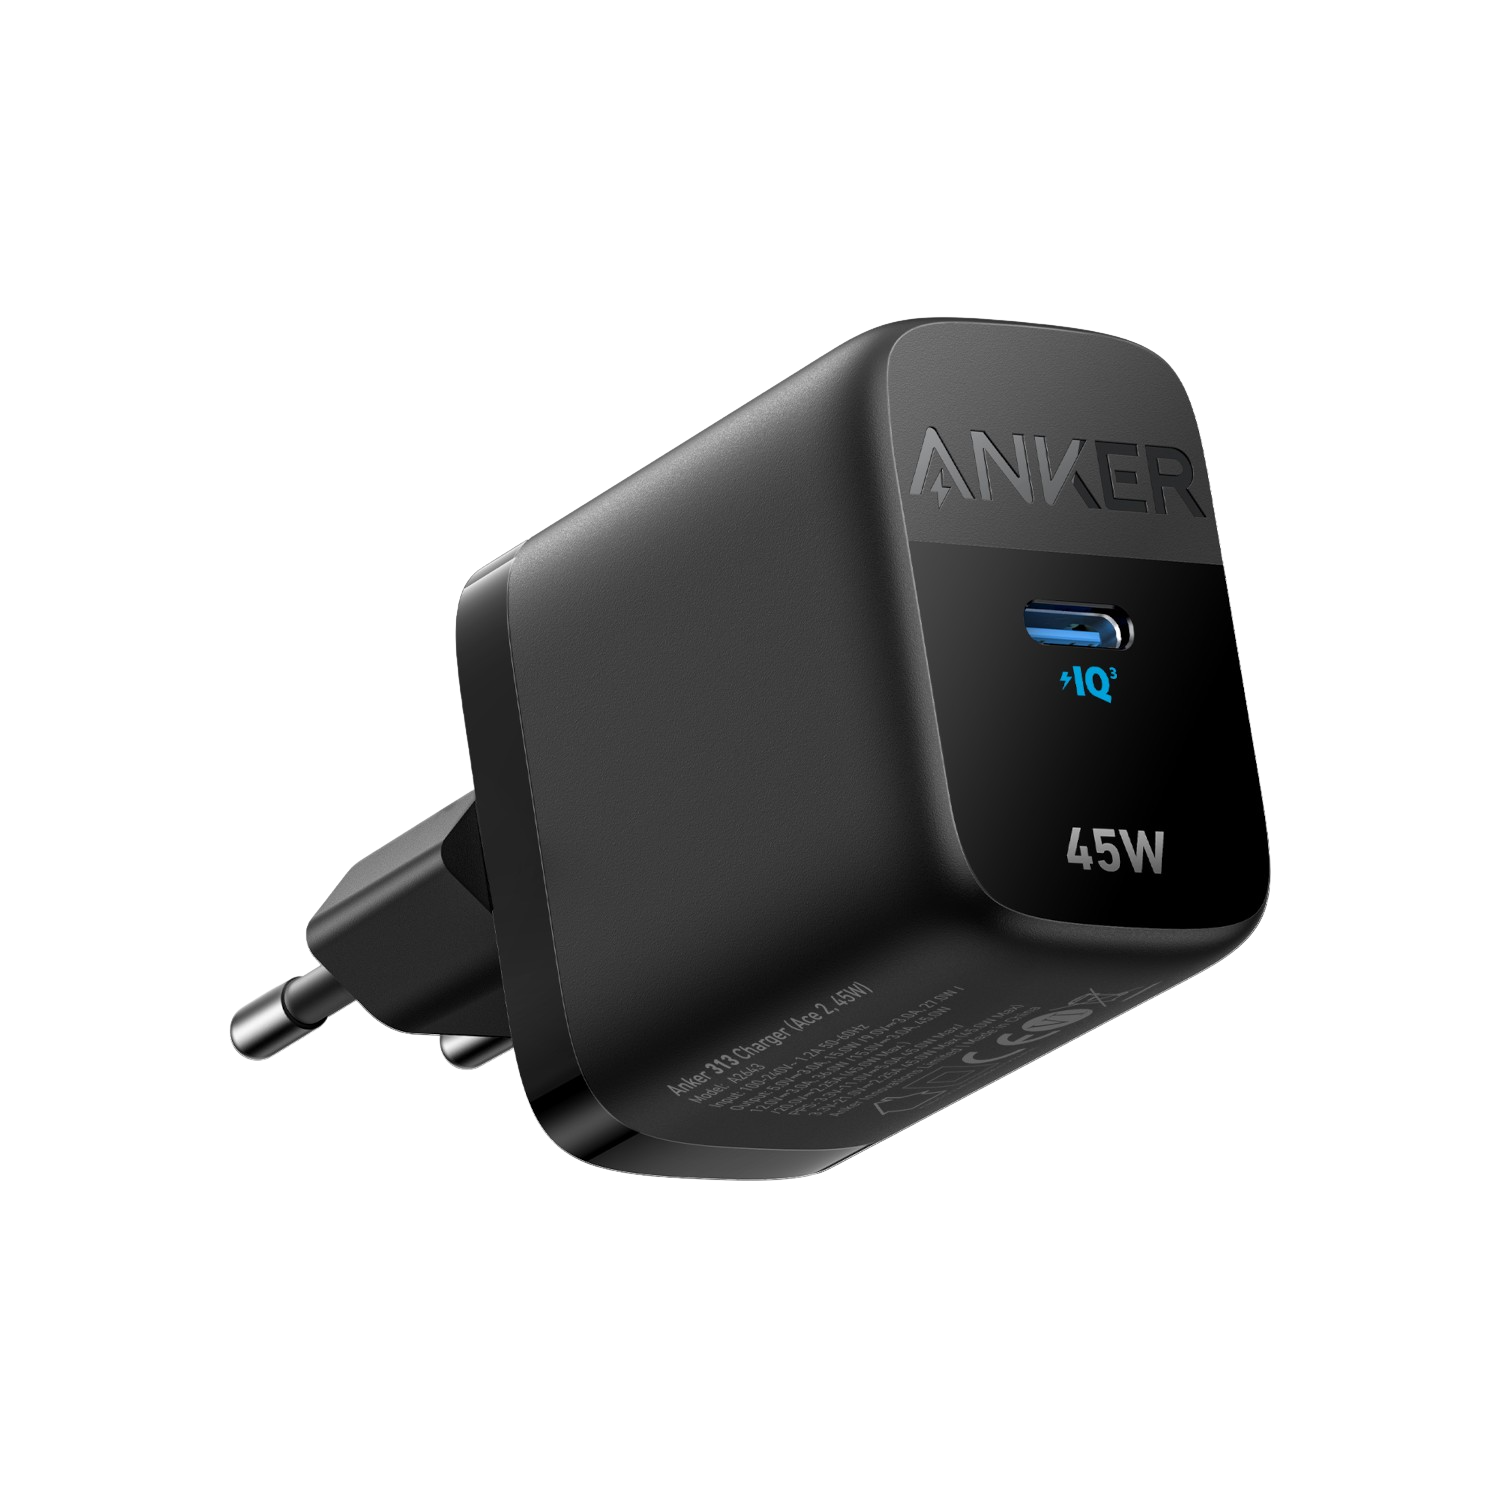 Anker Charger (45w)